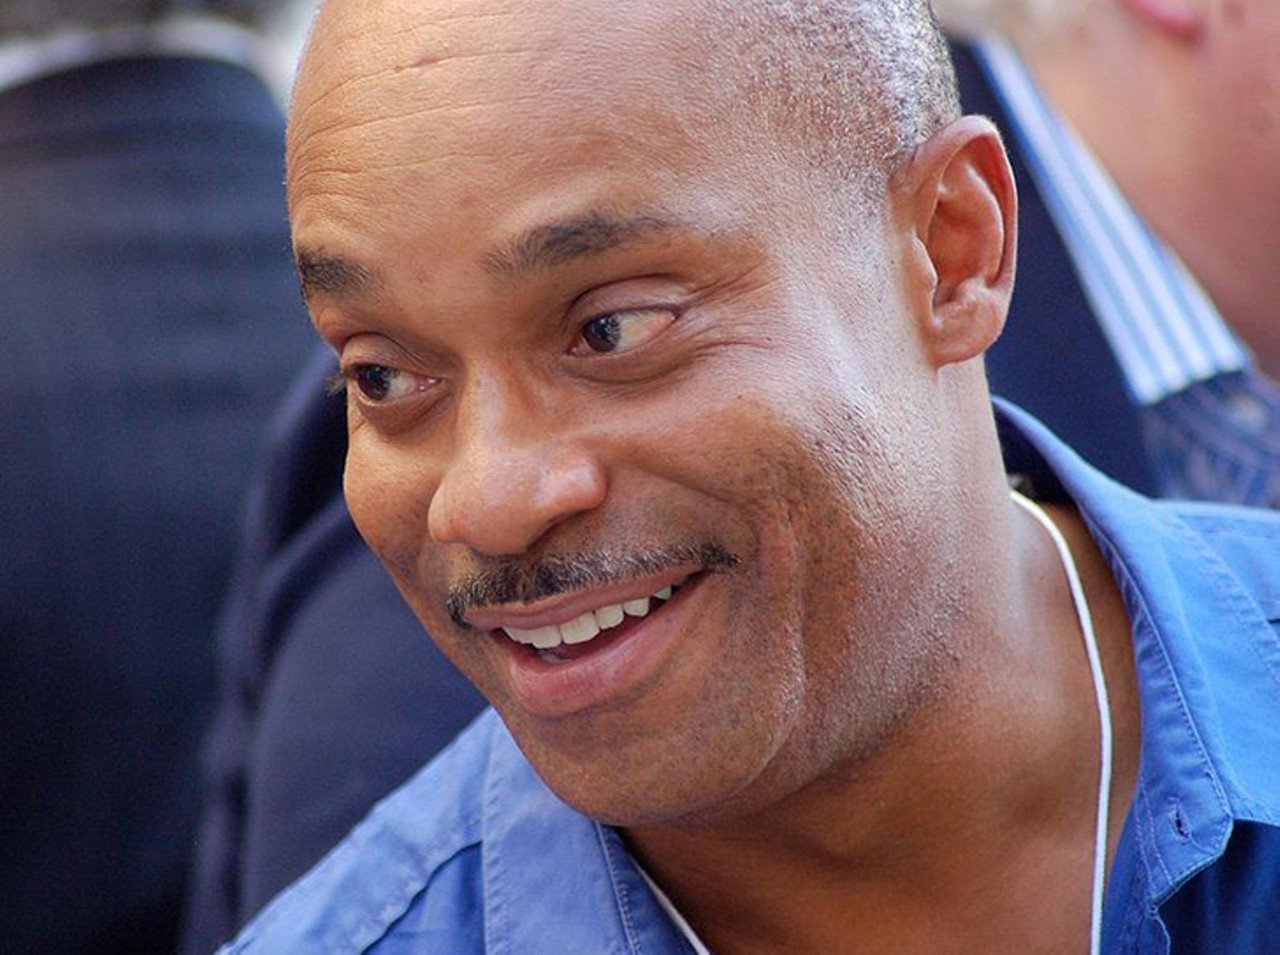 Rocky Carroll 
A graduate of the School for Creative and Performing Arts, Carroll is known for his role as Director Leon Vance on CBS' NCIS.